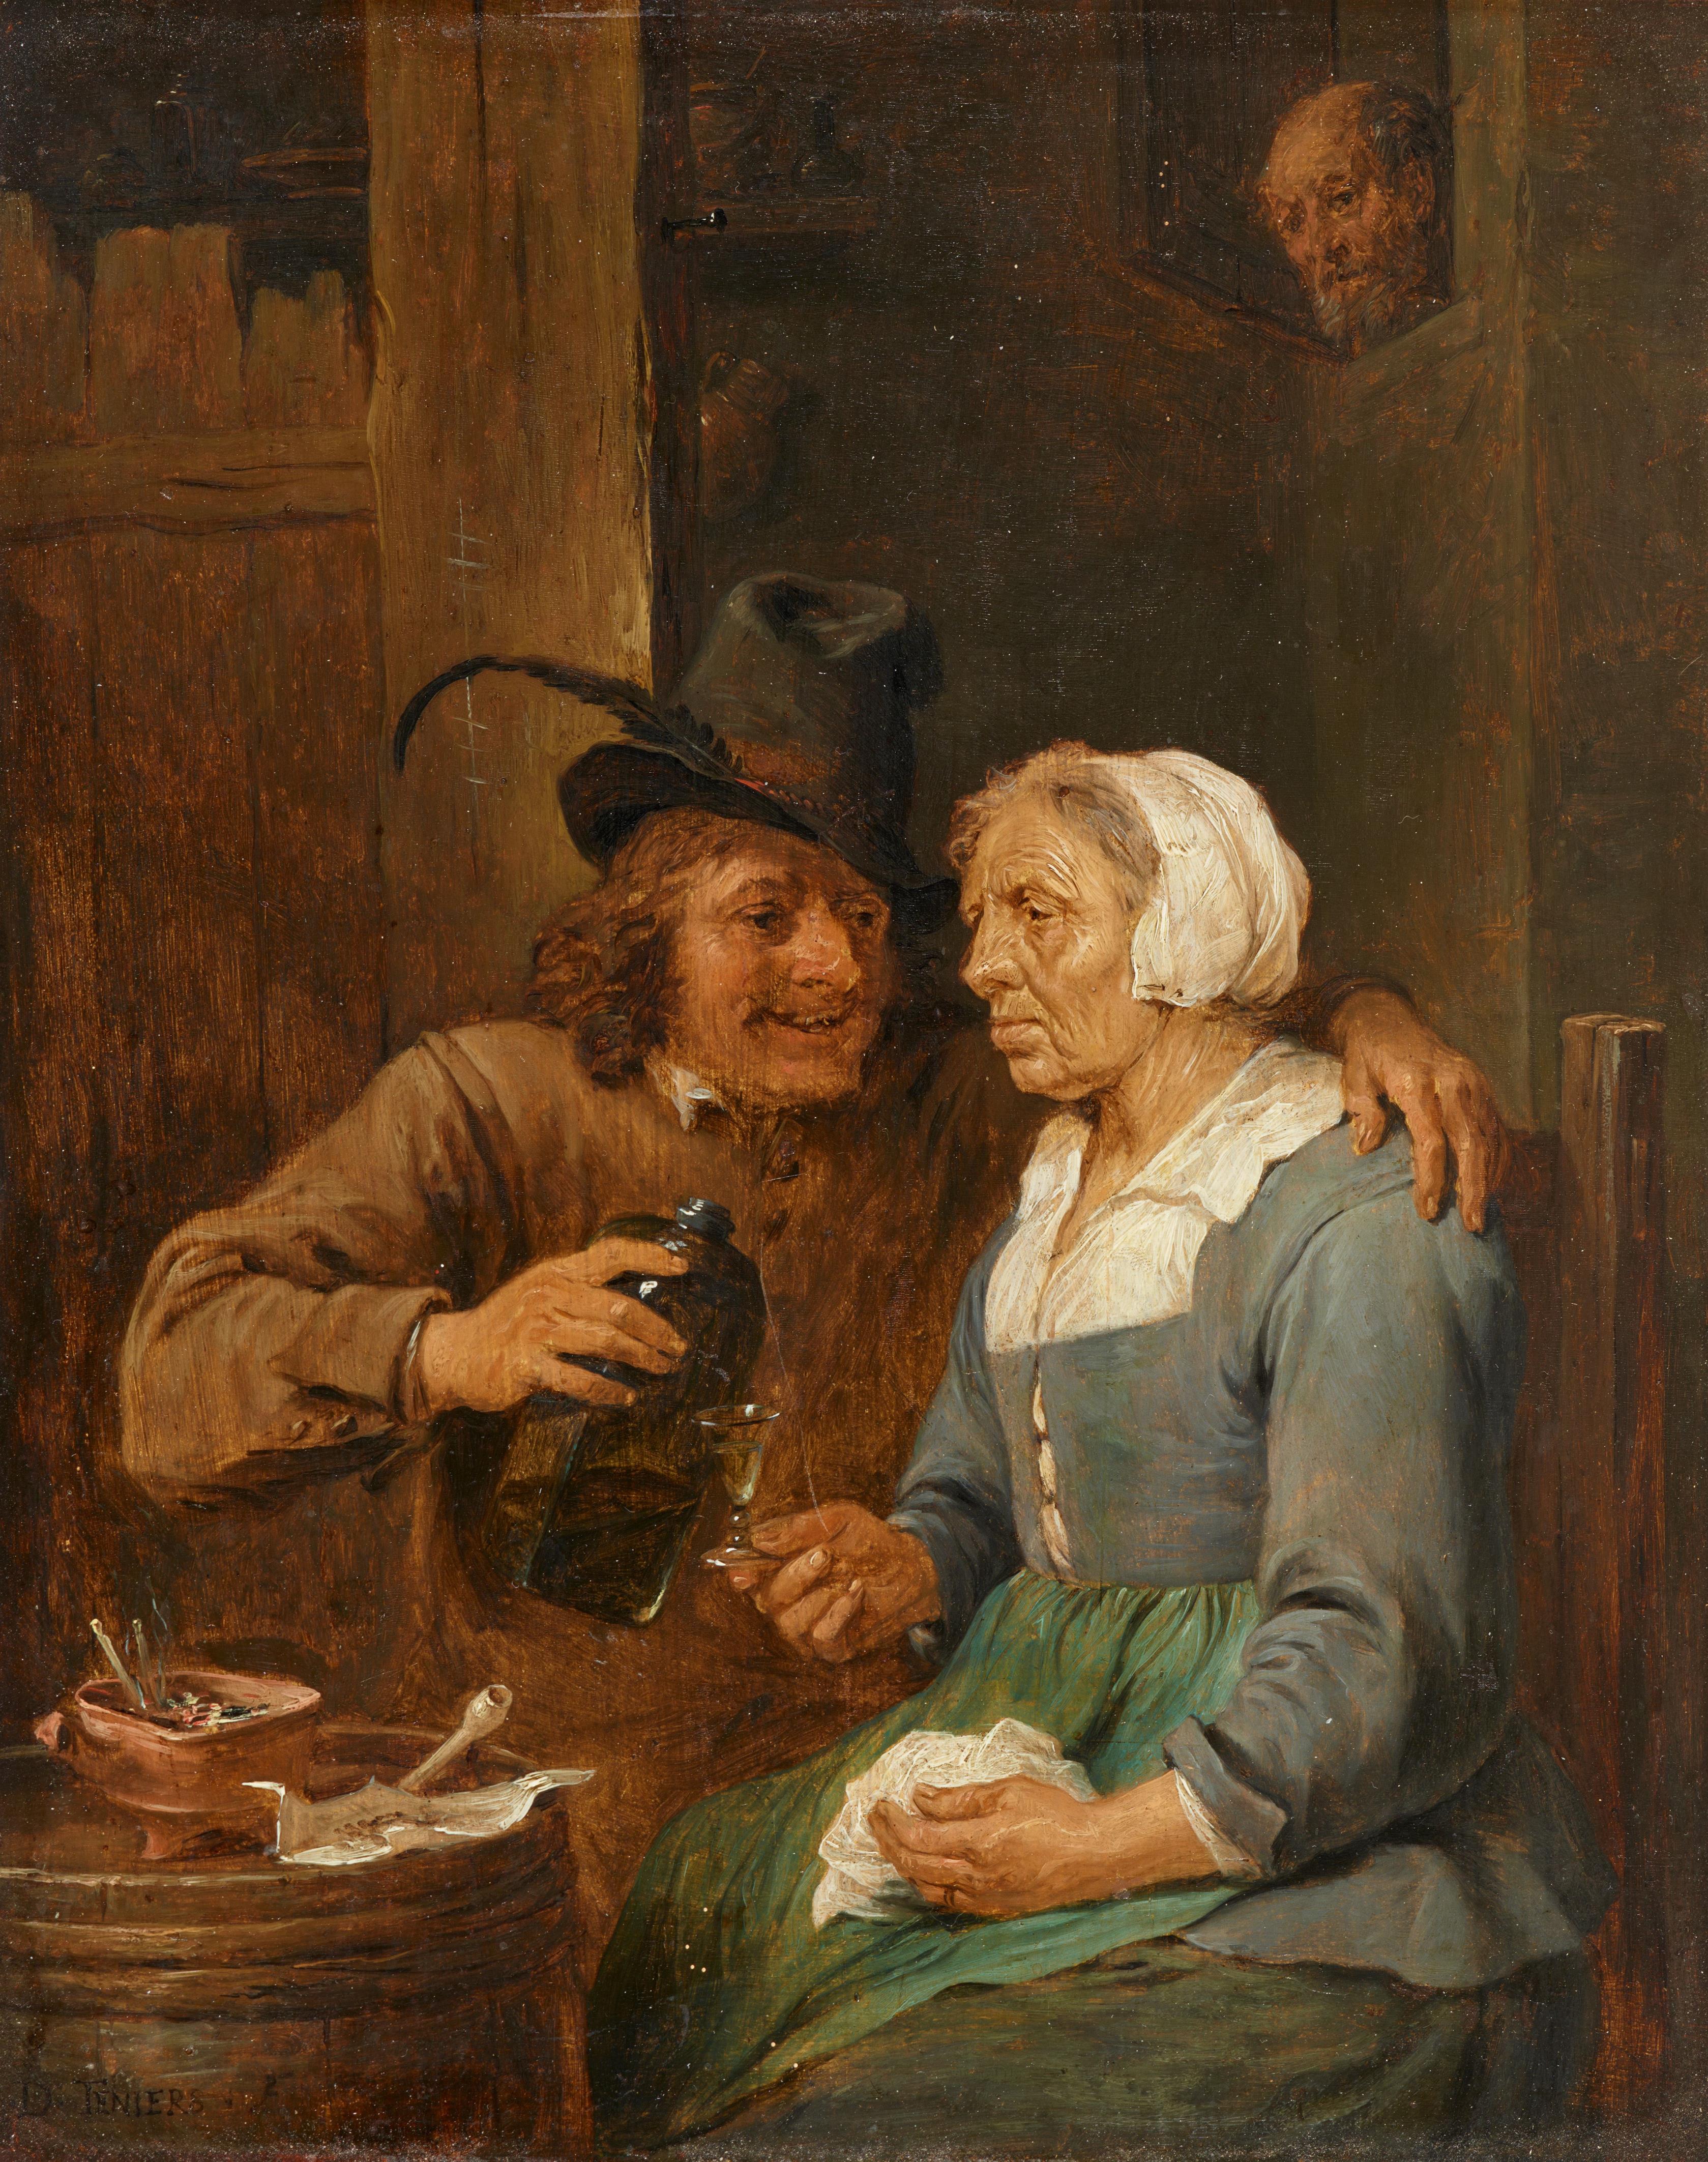 David Teniers the Younger, studio of - Drinking Couple - image-1